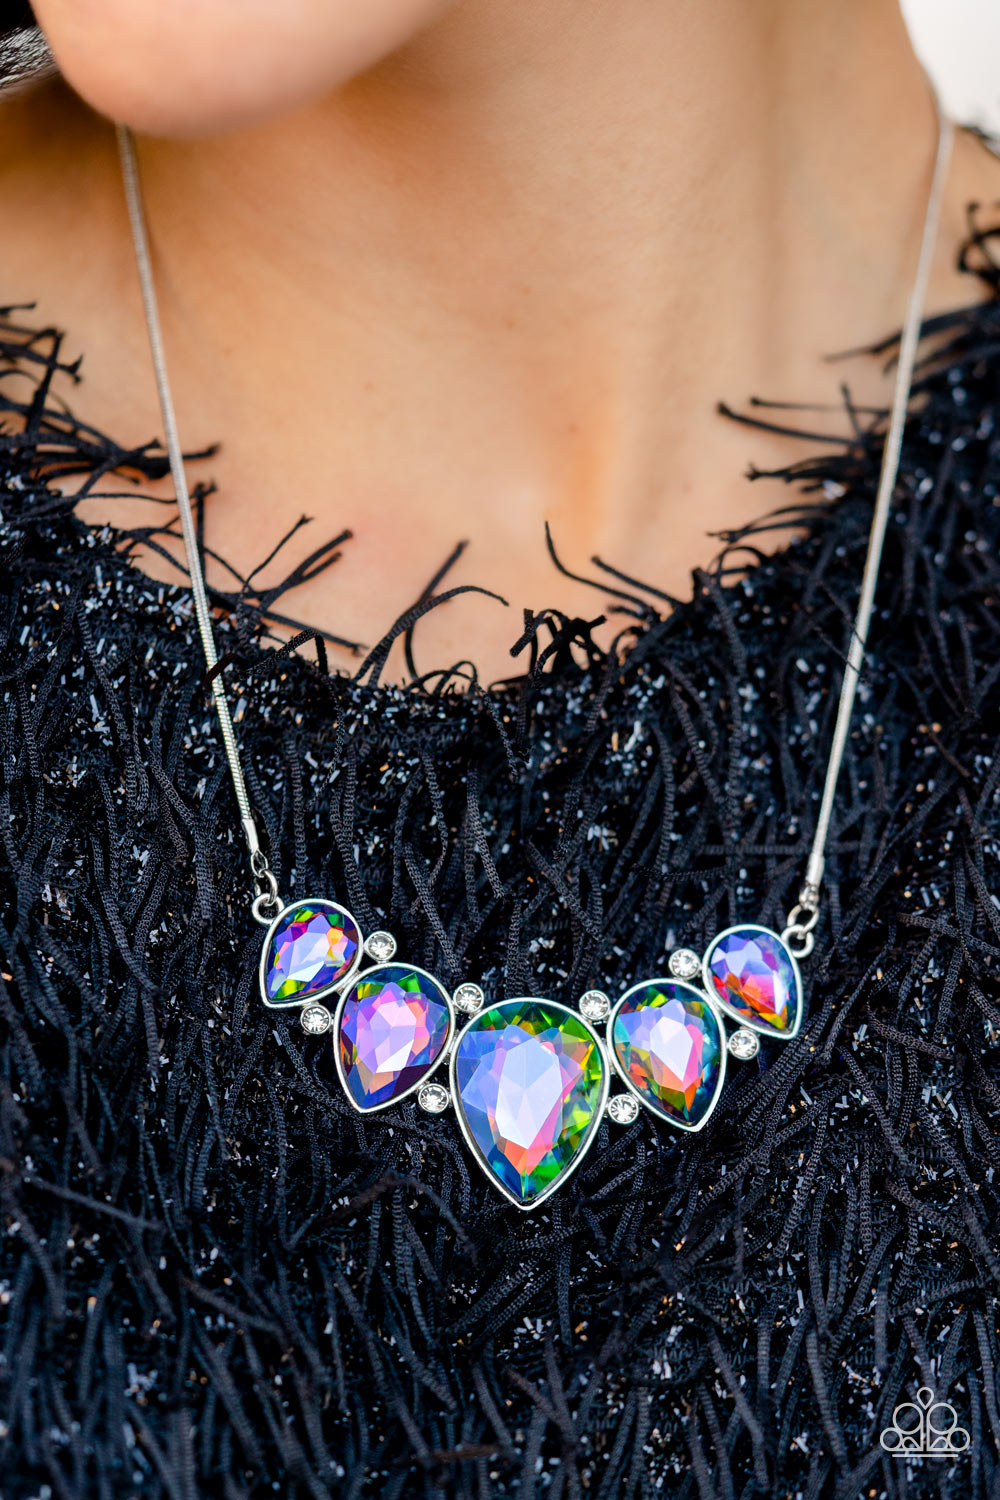 Regally Refined - Multi Color Teardrop Necklace - Paparazzi Accessories - Featuring a stellar UV shimmer, dramatic teardrop gems, gliding from a sleek, silver snake chain, are pressed into high-sheen silver casings, creating a colorful fringe below the collar. Linking each teardrop together, dainty white rhinestones border the tops and bottoms of each shape, creating additional eye-catching dazzle.